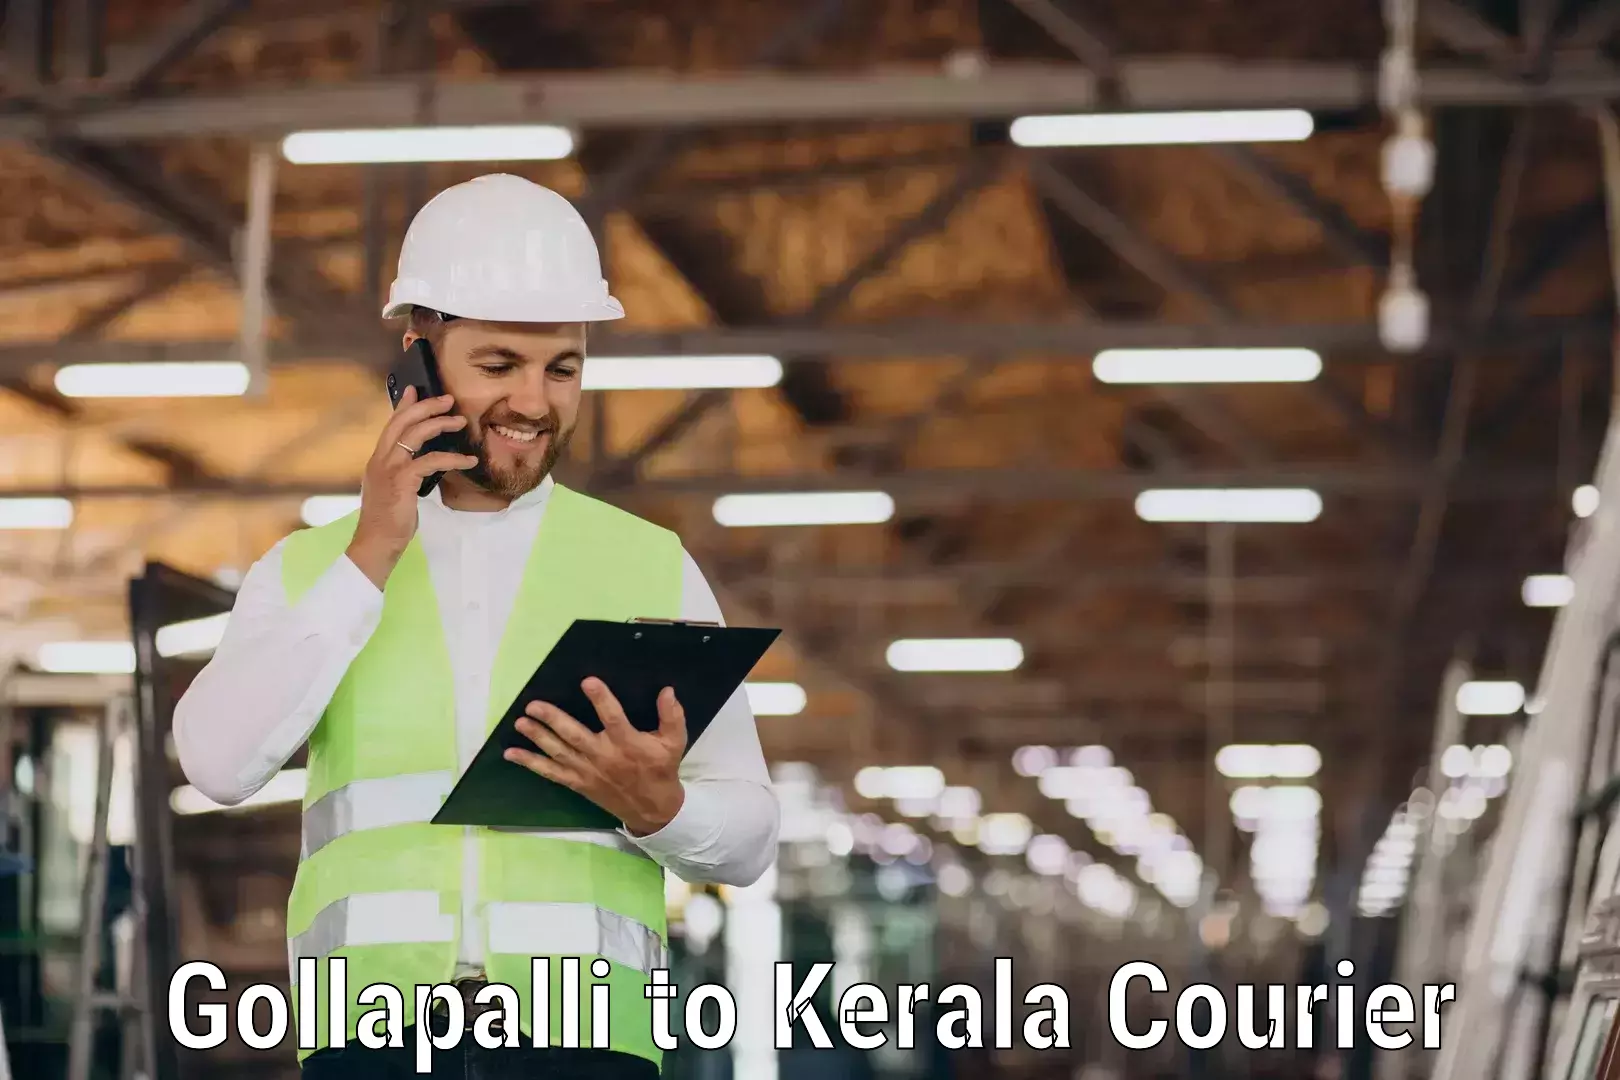 Reliable delivery network Gollapalli to Nallepilly